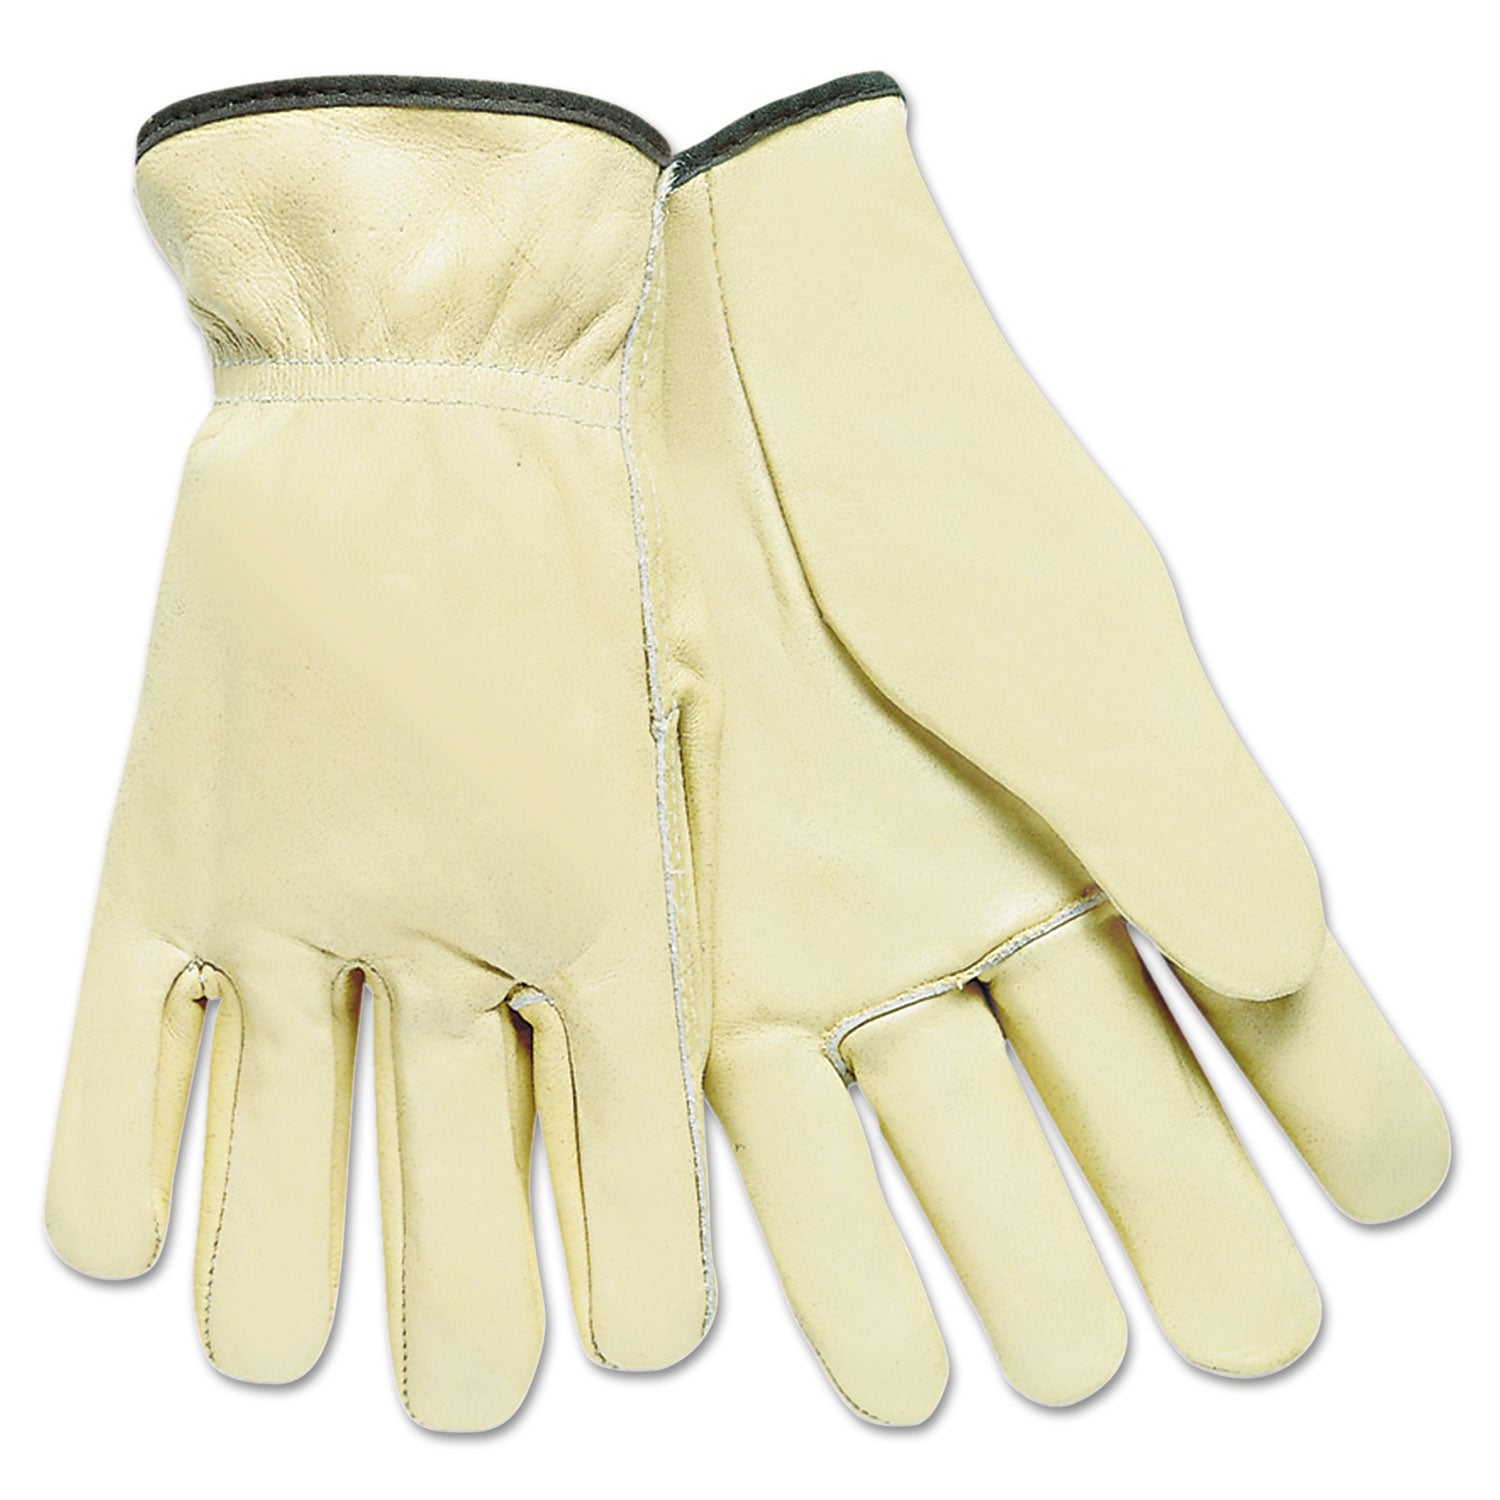 Full Leather Cow Grain Driver Gloves, Tan, Large, 12 Pairs - 